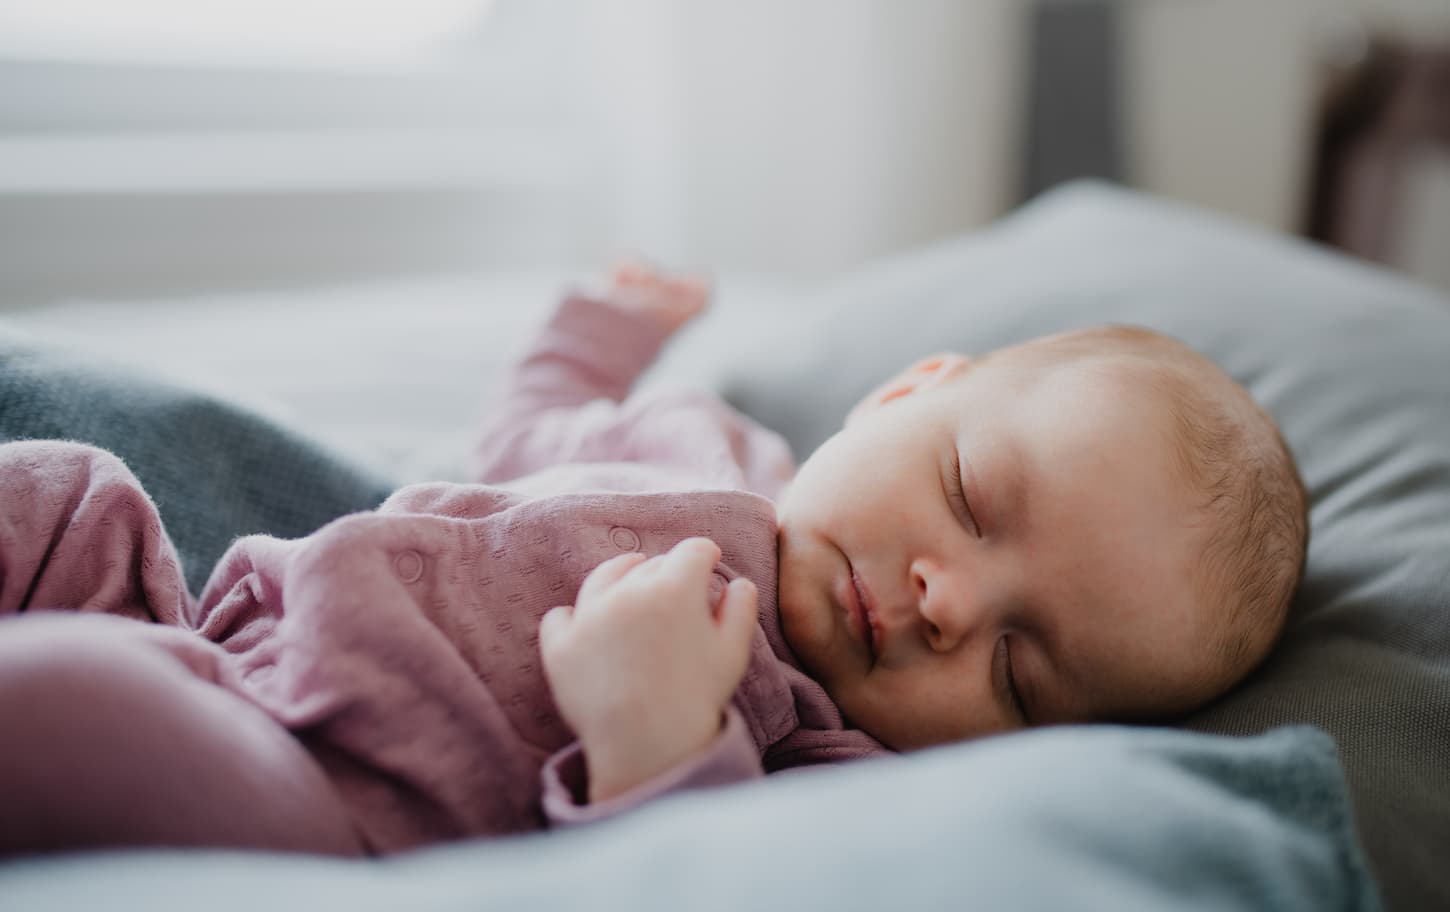 An image of a cute newborn baby girl, sleeping and lying on a sofa indoors at home.